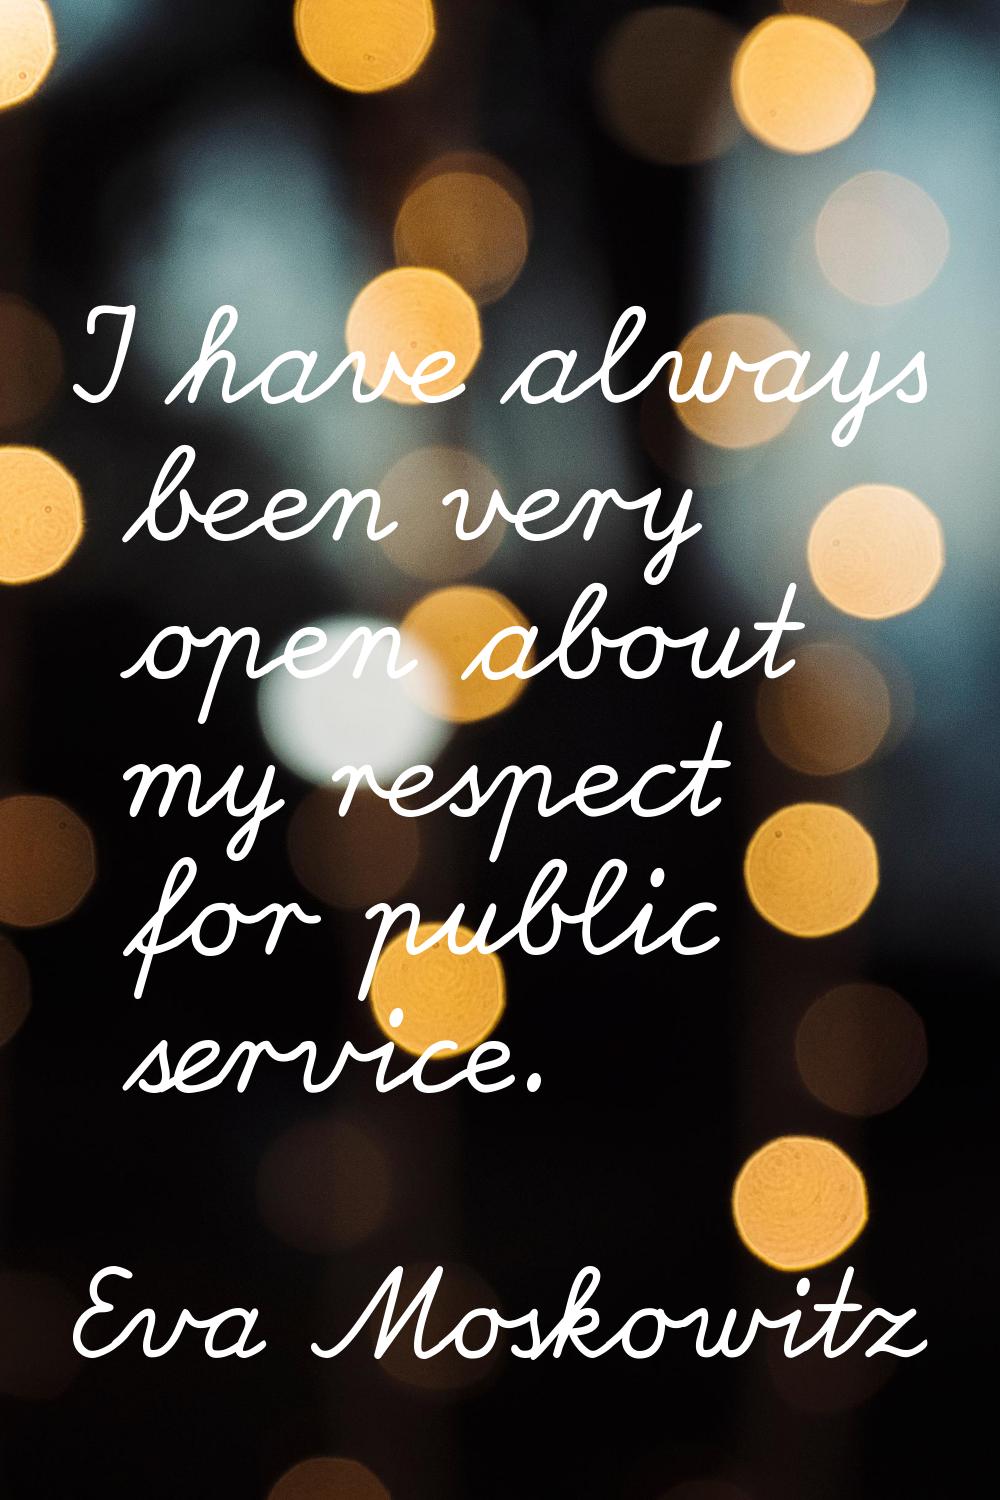 I have always been very open about my respect for public service.